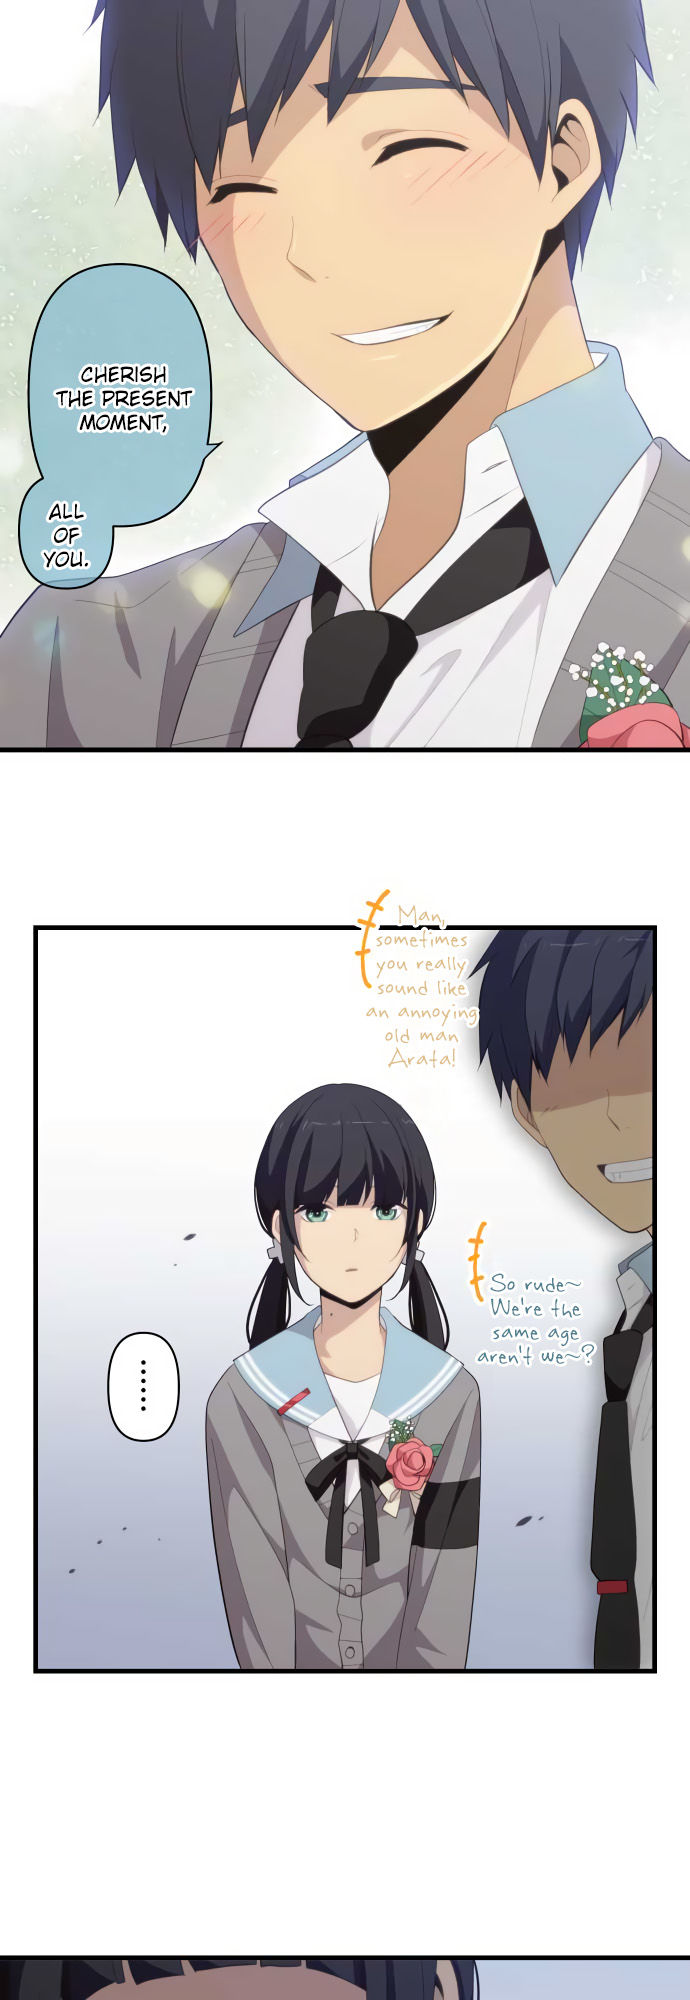 Relife 211 18